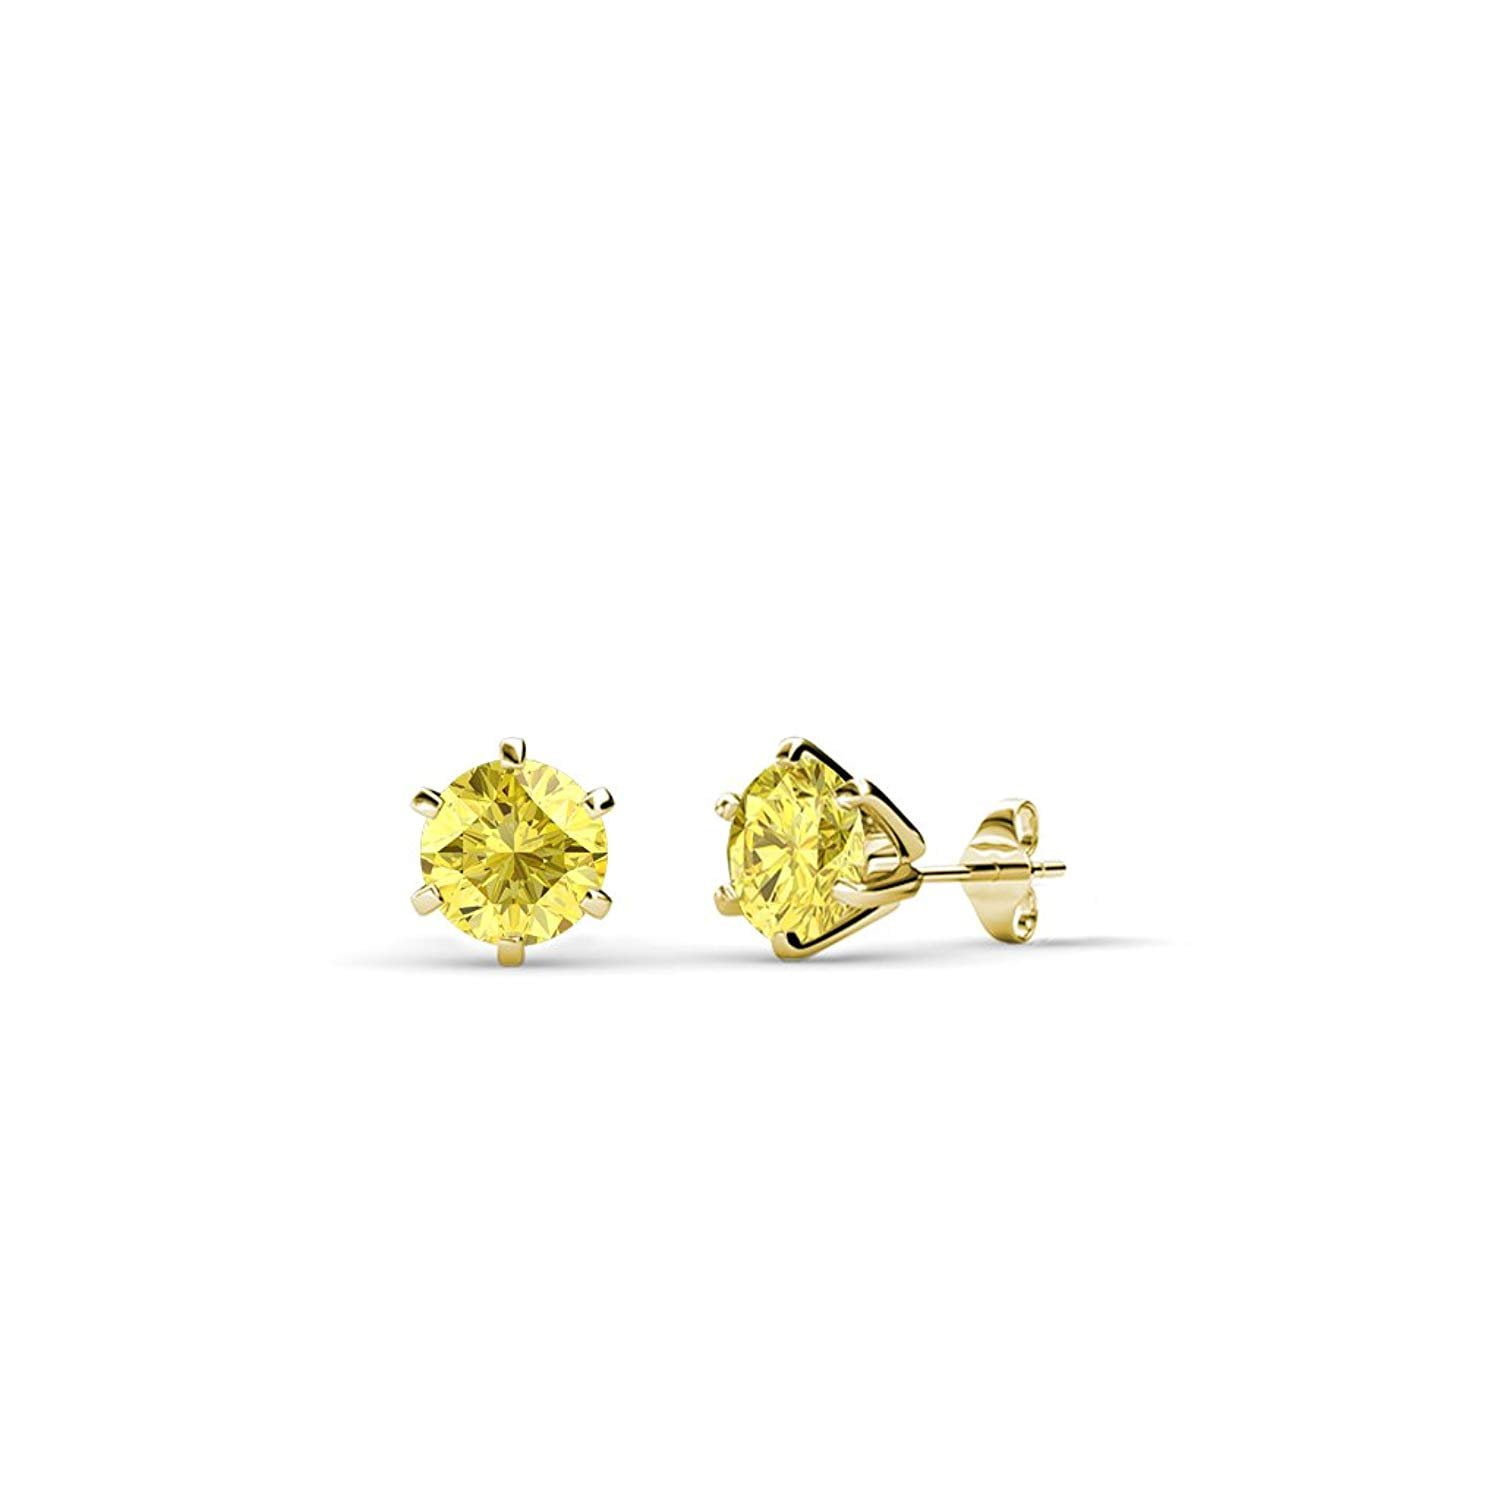 TriJewels Round Citrine 7/8 ctw Three Prong Womems Martini Solitaire Stud Earrings 14K White Gold